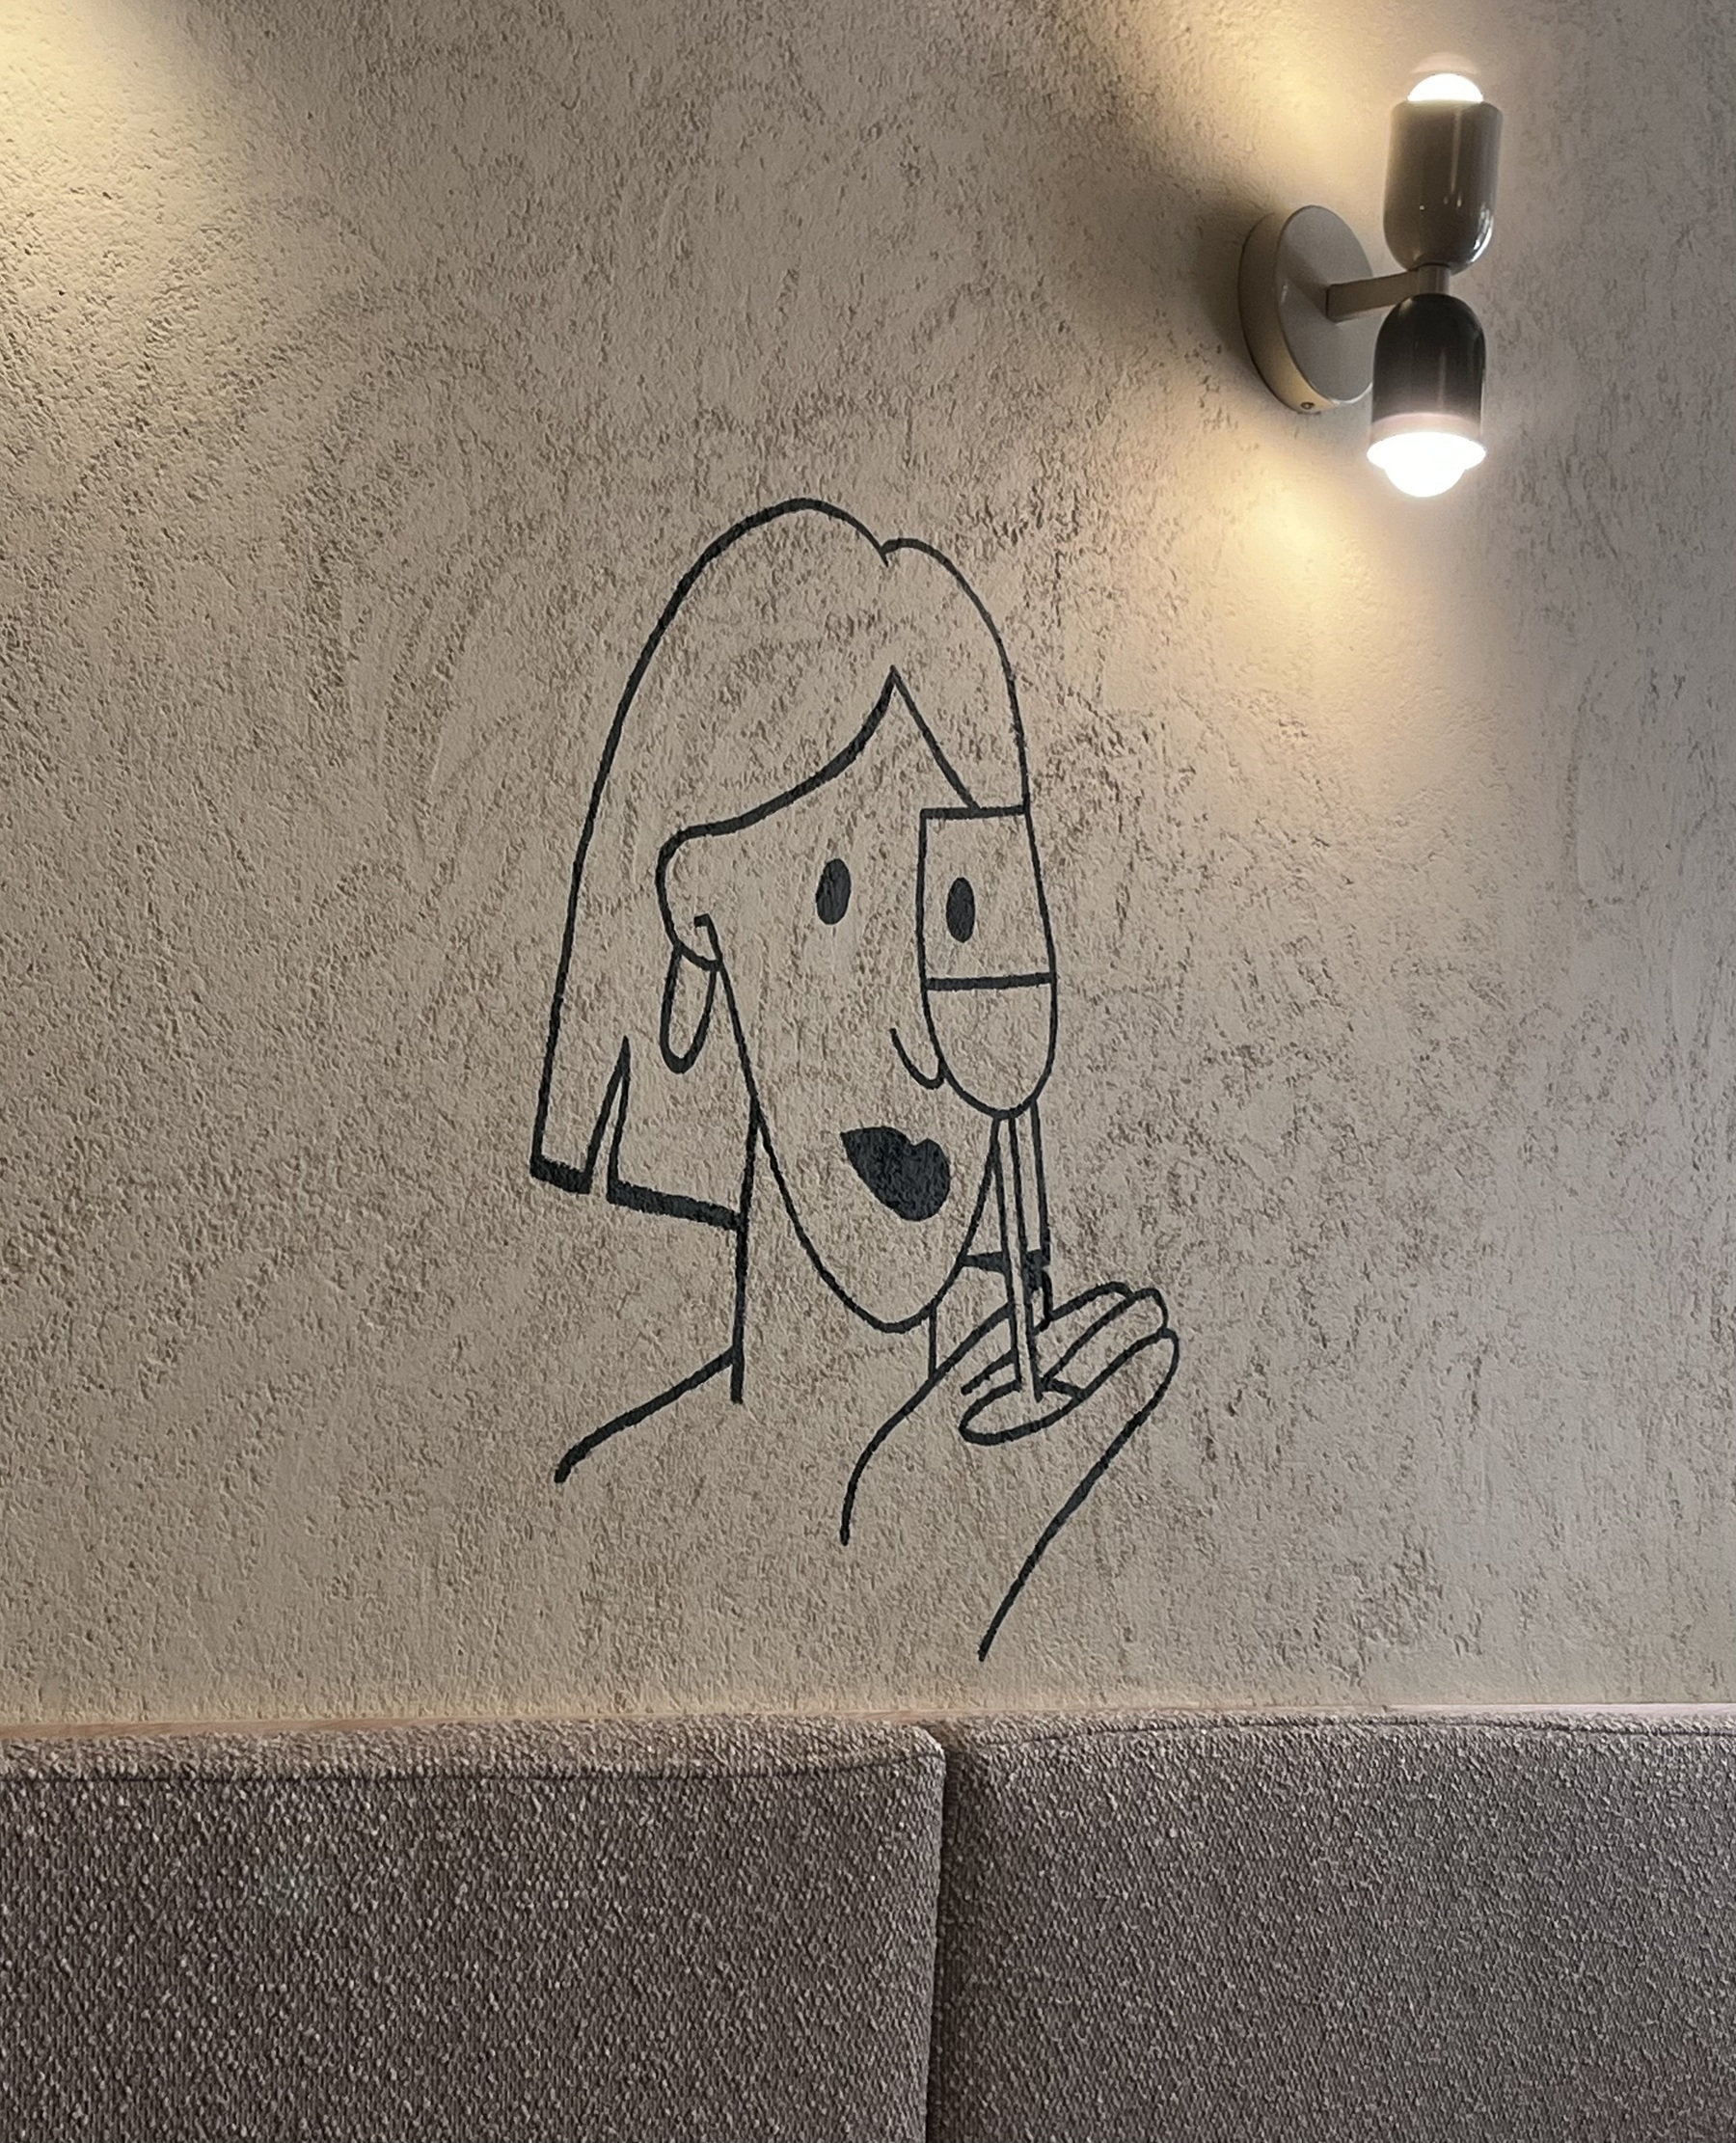 Drawing on a wall in a restaurant of a woman eying a glass of wine. A double light shines above